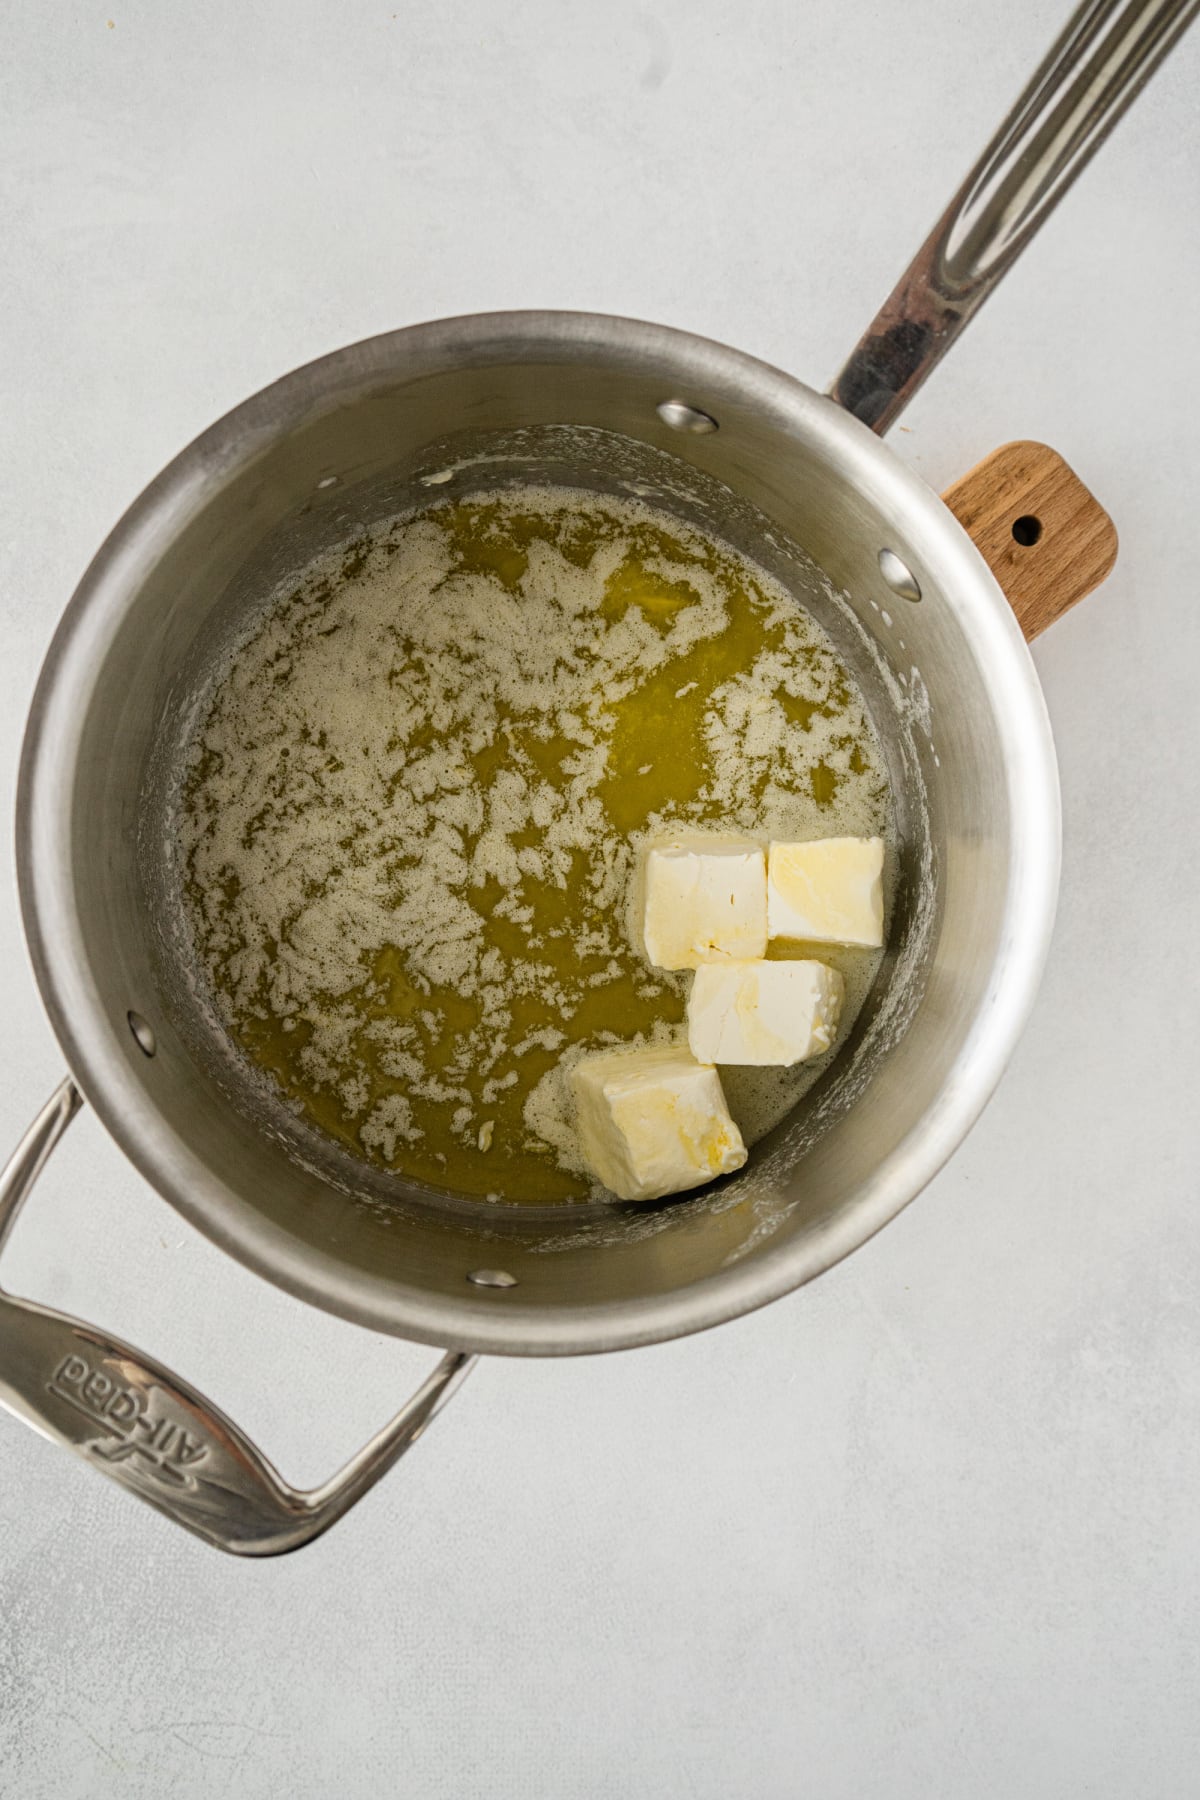 Butter melted in saucepan